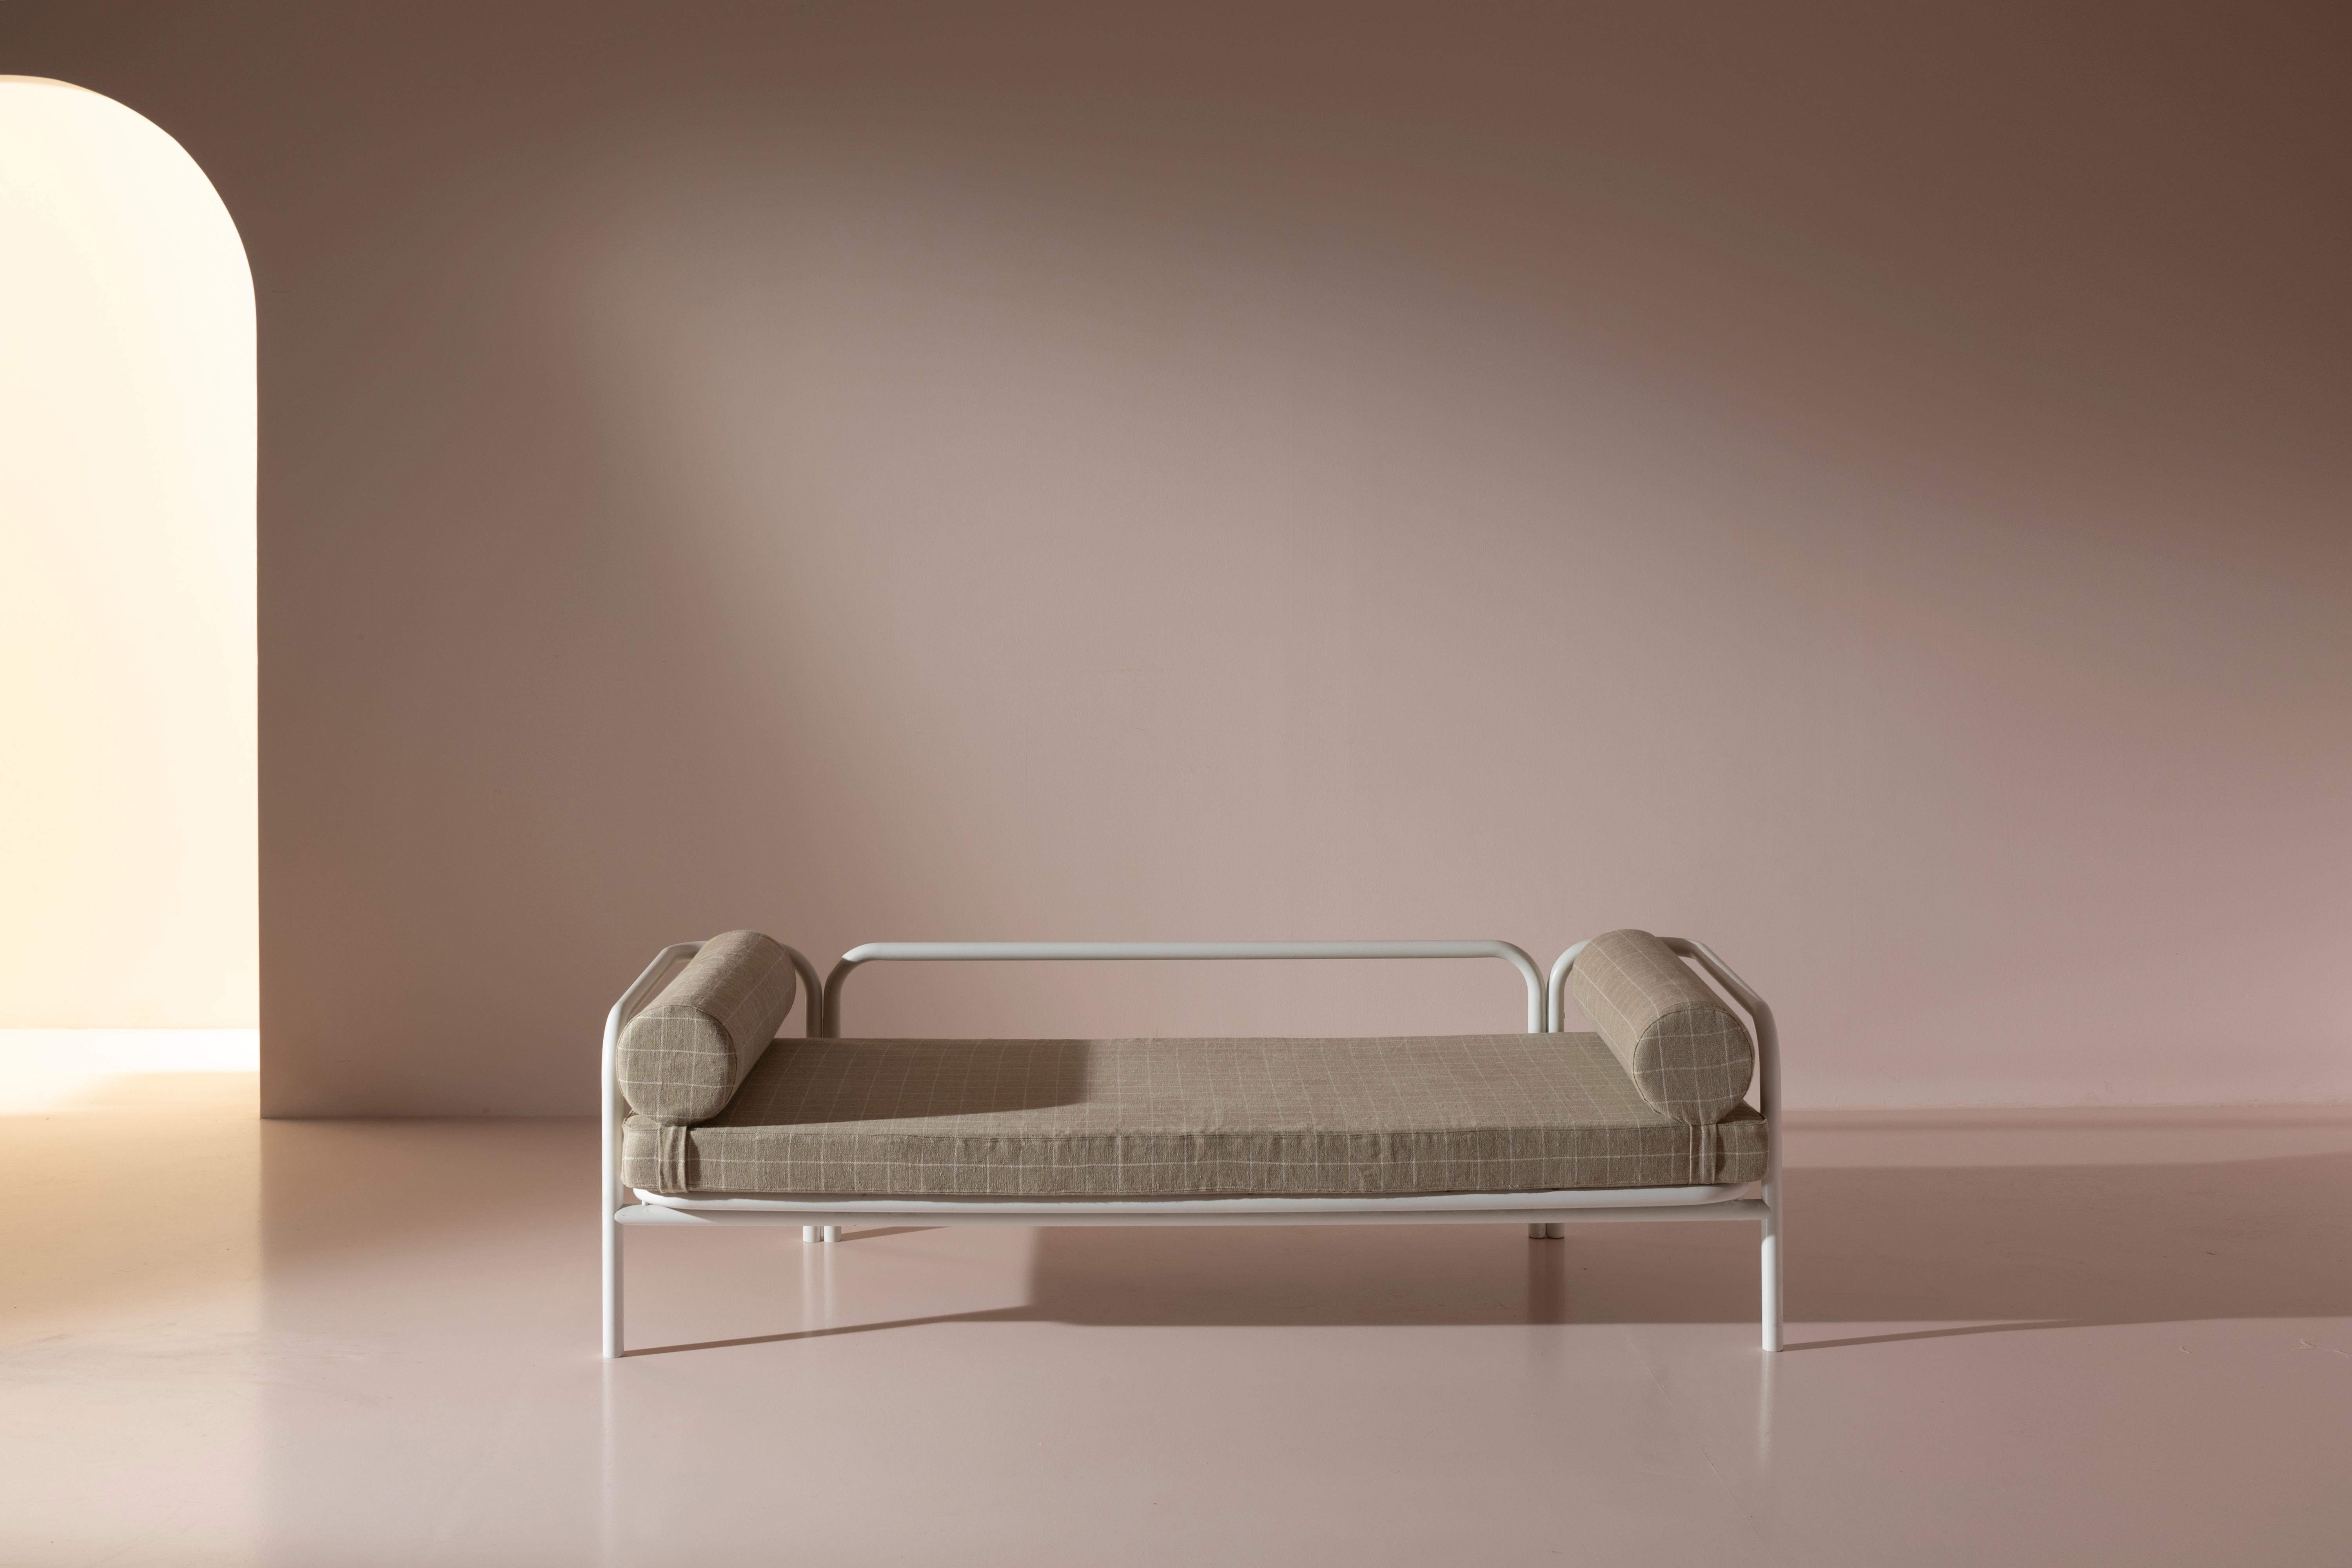 Tubular metal daybed, model Locus Solus, designed by Gae Aulenti, produced by Poltronova in 1964.

A painted metal tube unpredictably bends and takes the form of a daybed, as if sketched by a continuous, unbroken line of a pencil moving across a